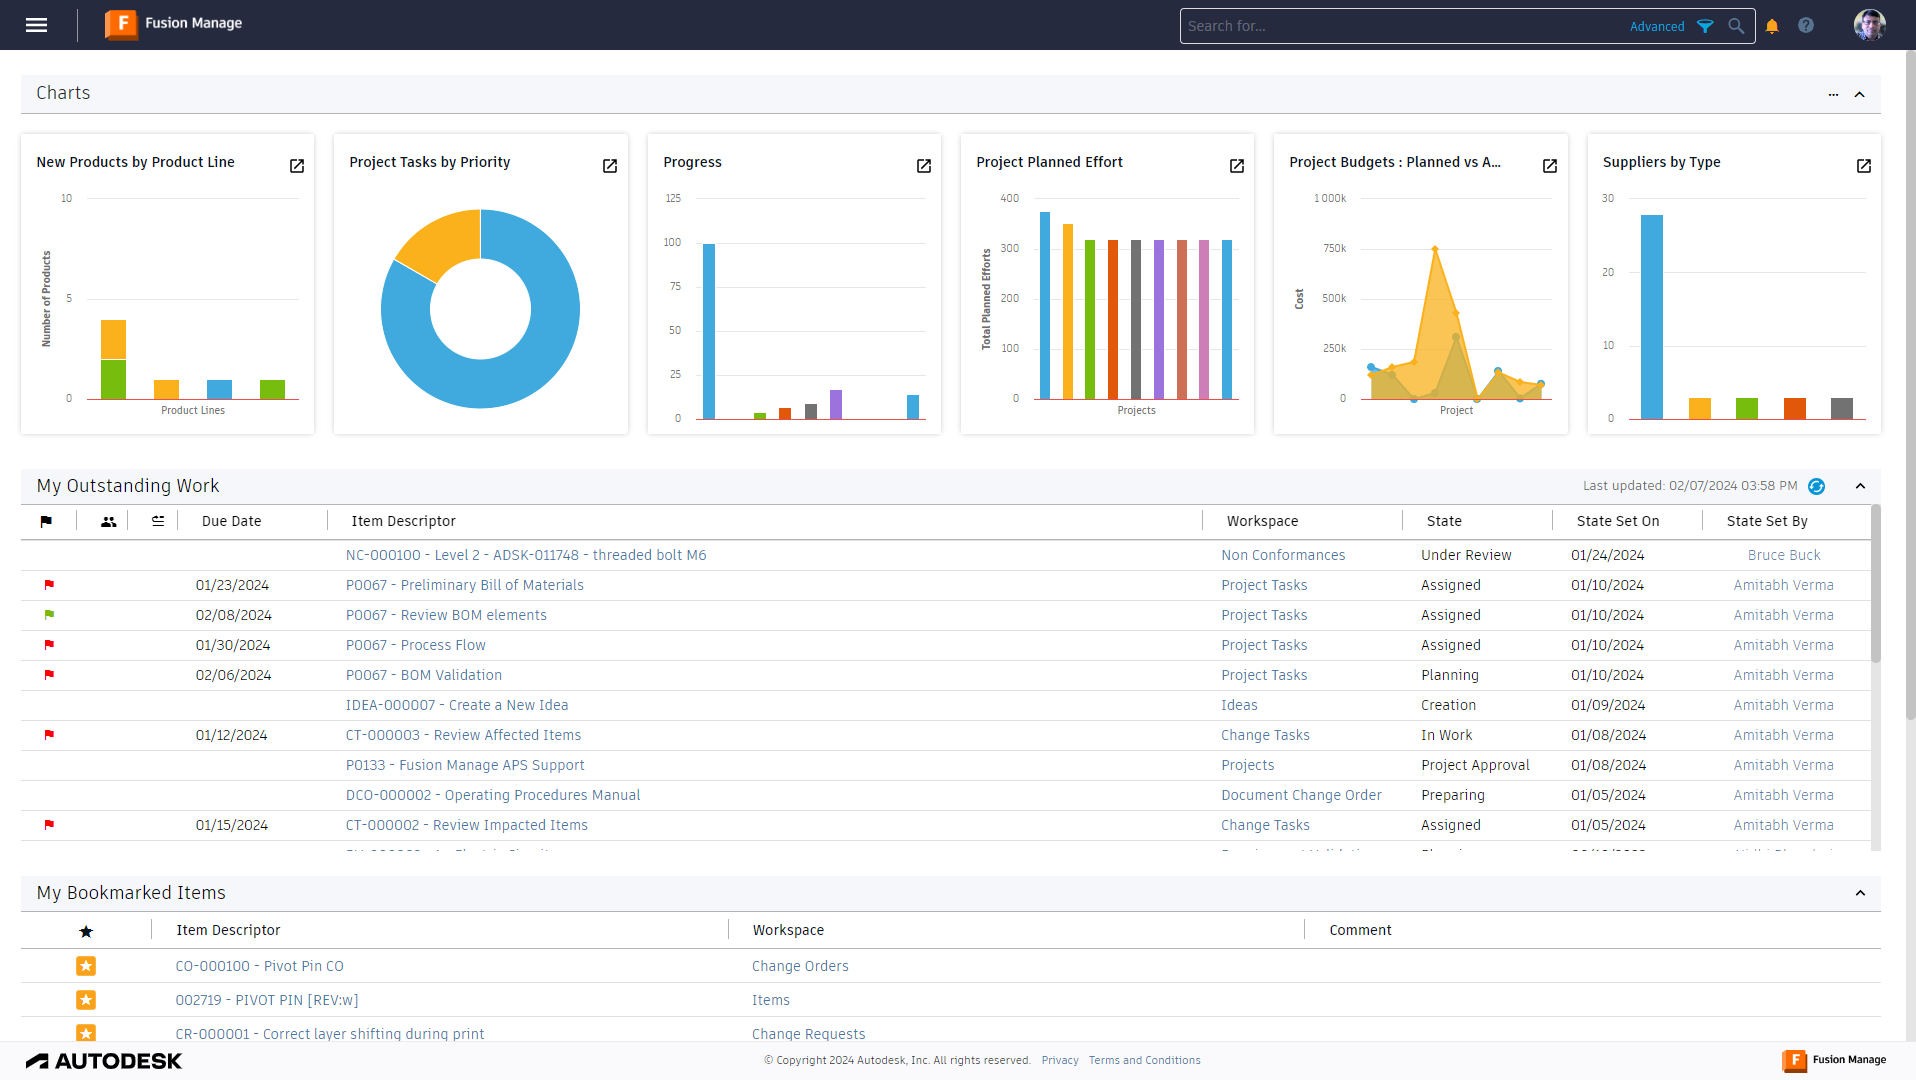 Dashboards and KPIs: Monitor product development progress in real-time using graphically rich dashboards that help you spot issues and prevent delays before they happen. Export status reports quickly with a single click for no-hassle status updates.